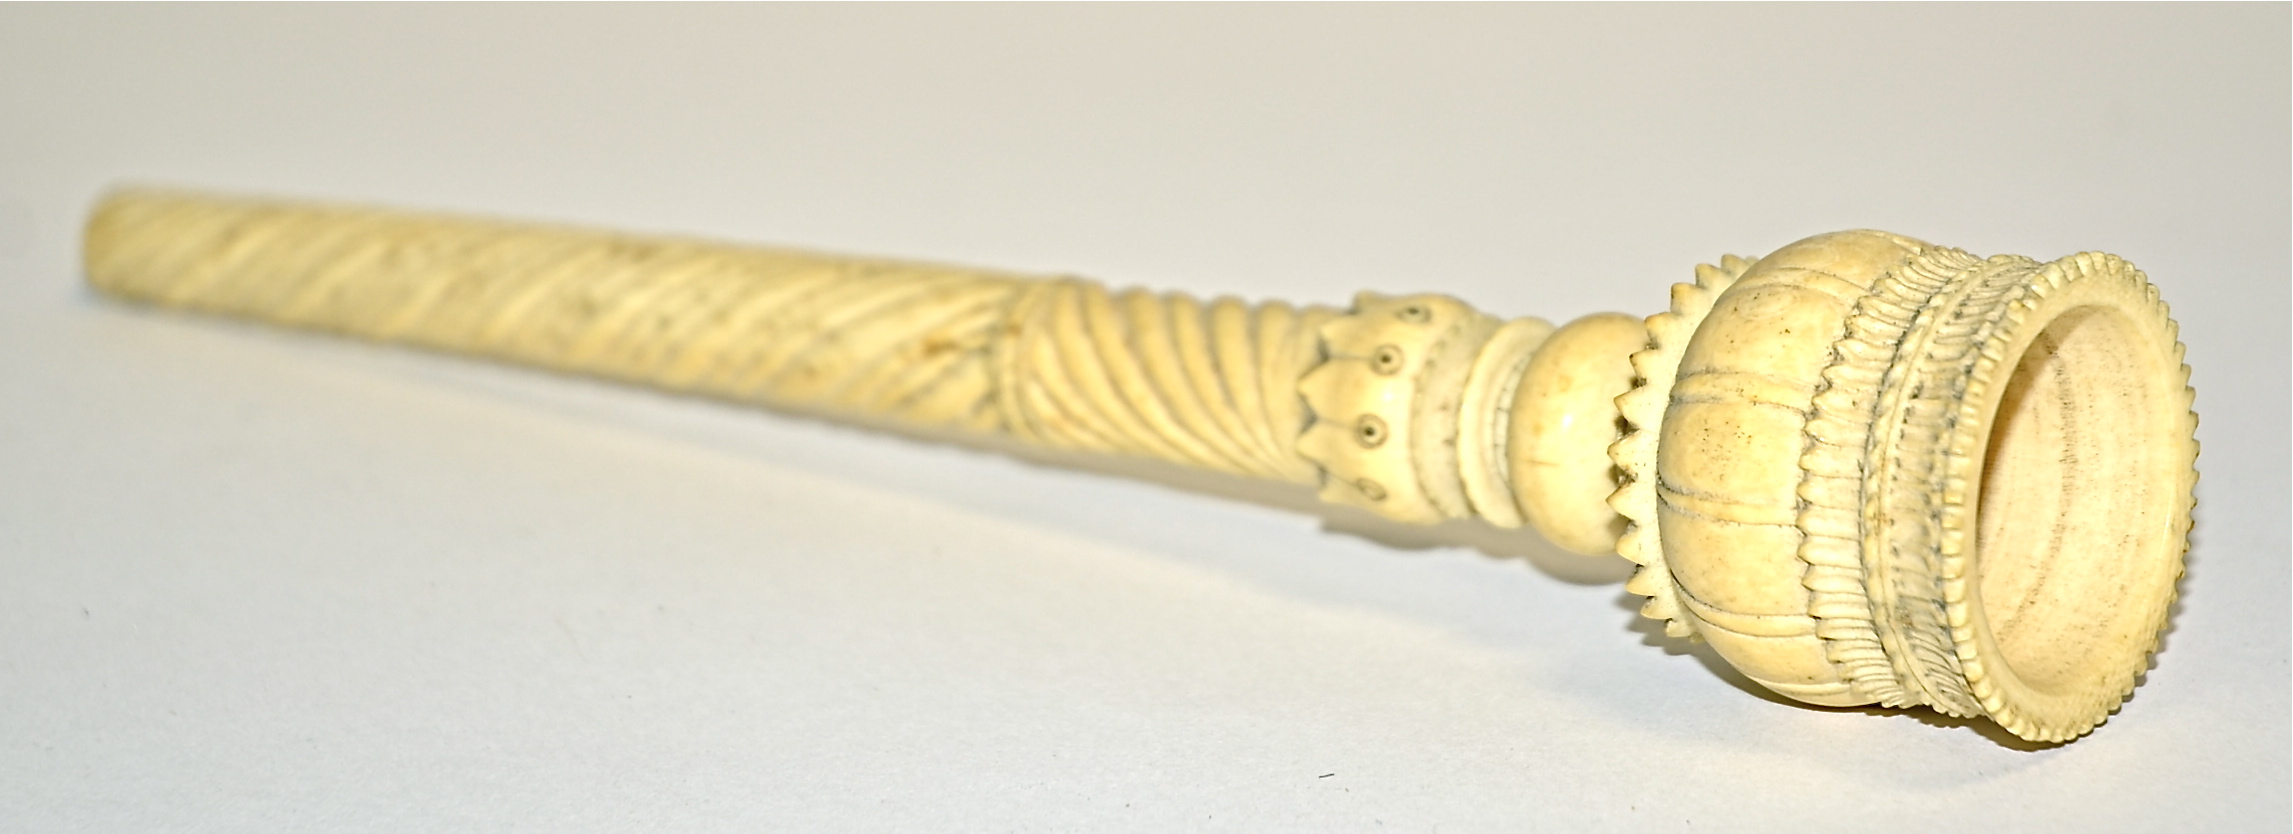 An early 19th Century or earlier ivory child's bilboquet cup and ball toy, the carved cup - Image 2 of 2